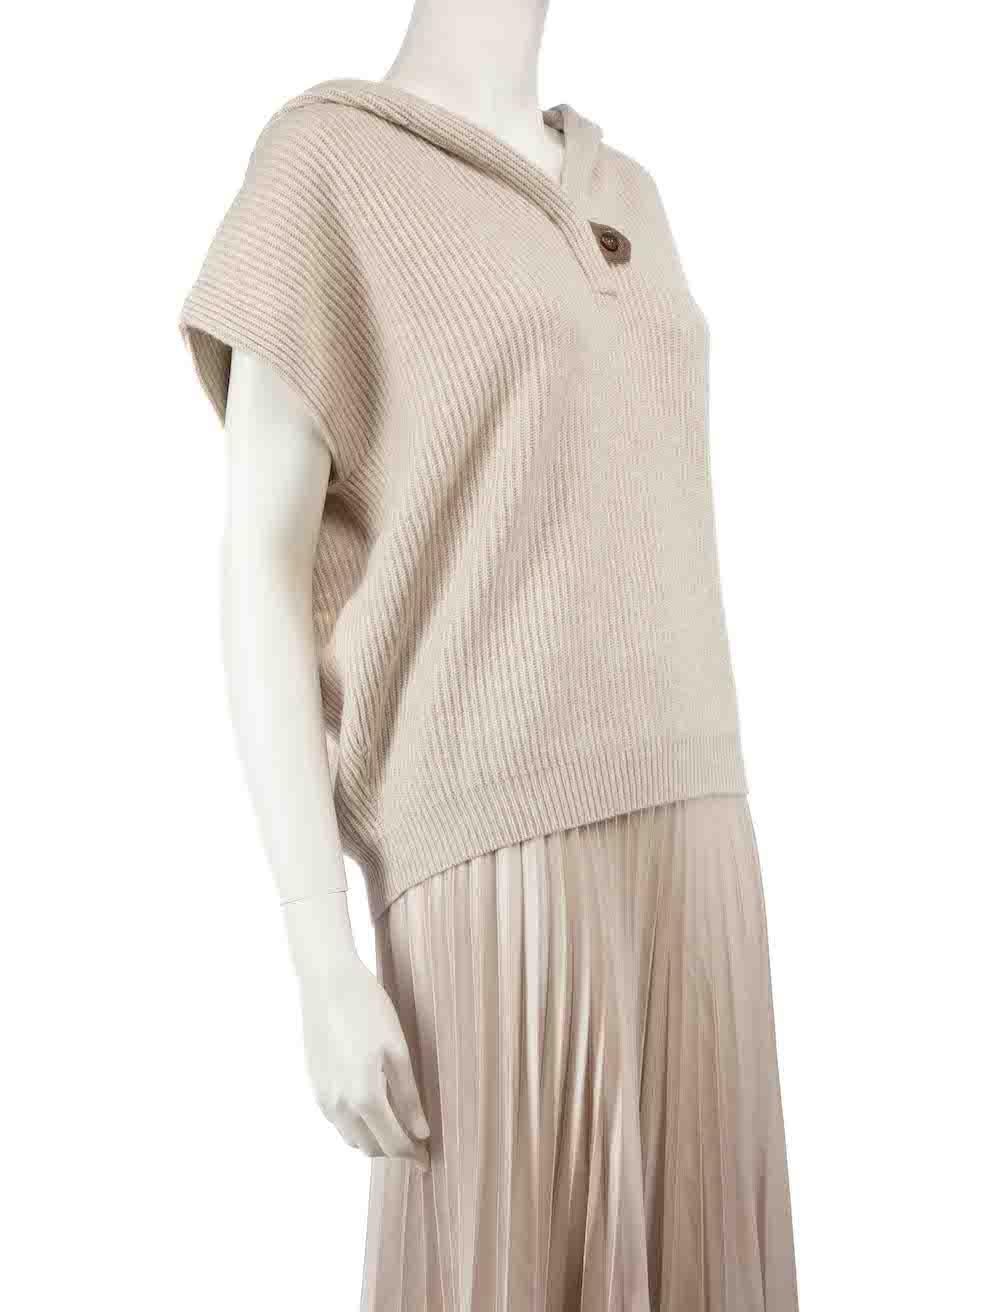 CONDITION is Very good. Hardly any visible wear to hoodie is evident on this used Brunello Cucinelli designer resale item.
 
 
 
 Details
 
 
 Beige
 
 Cashmere
 
 Vest
 
 Rib knitted and stretchy
 
 Hooded
 
 Front beaded button closure
 
 
 
 
 
